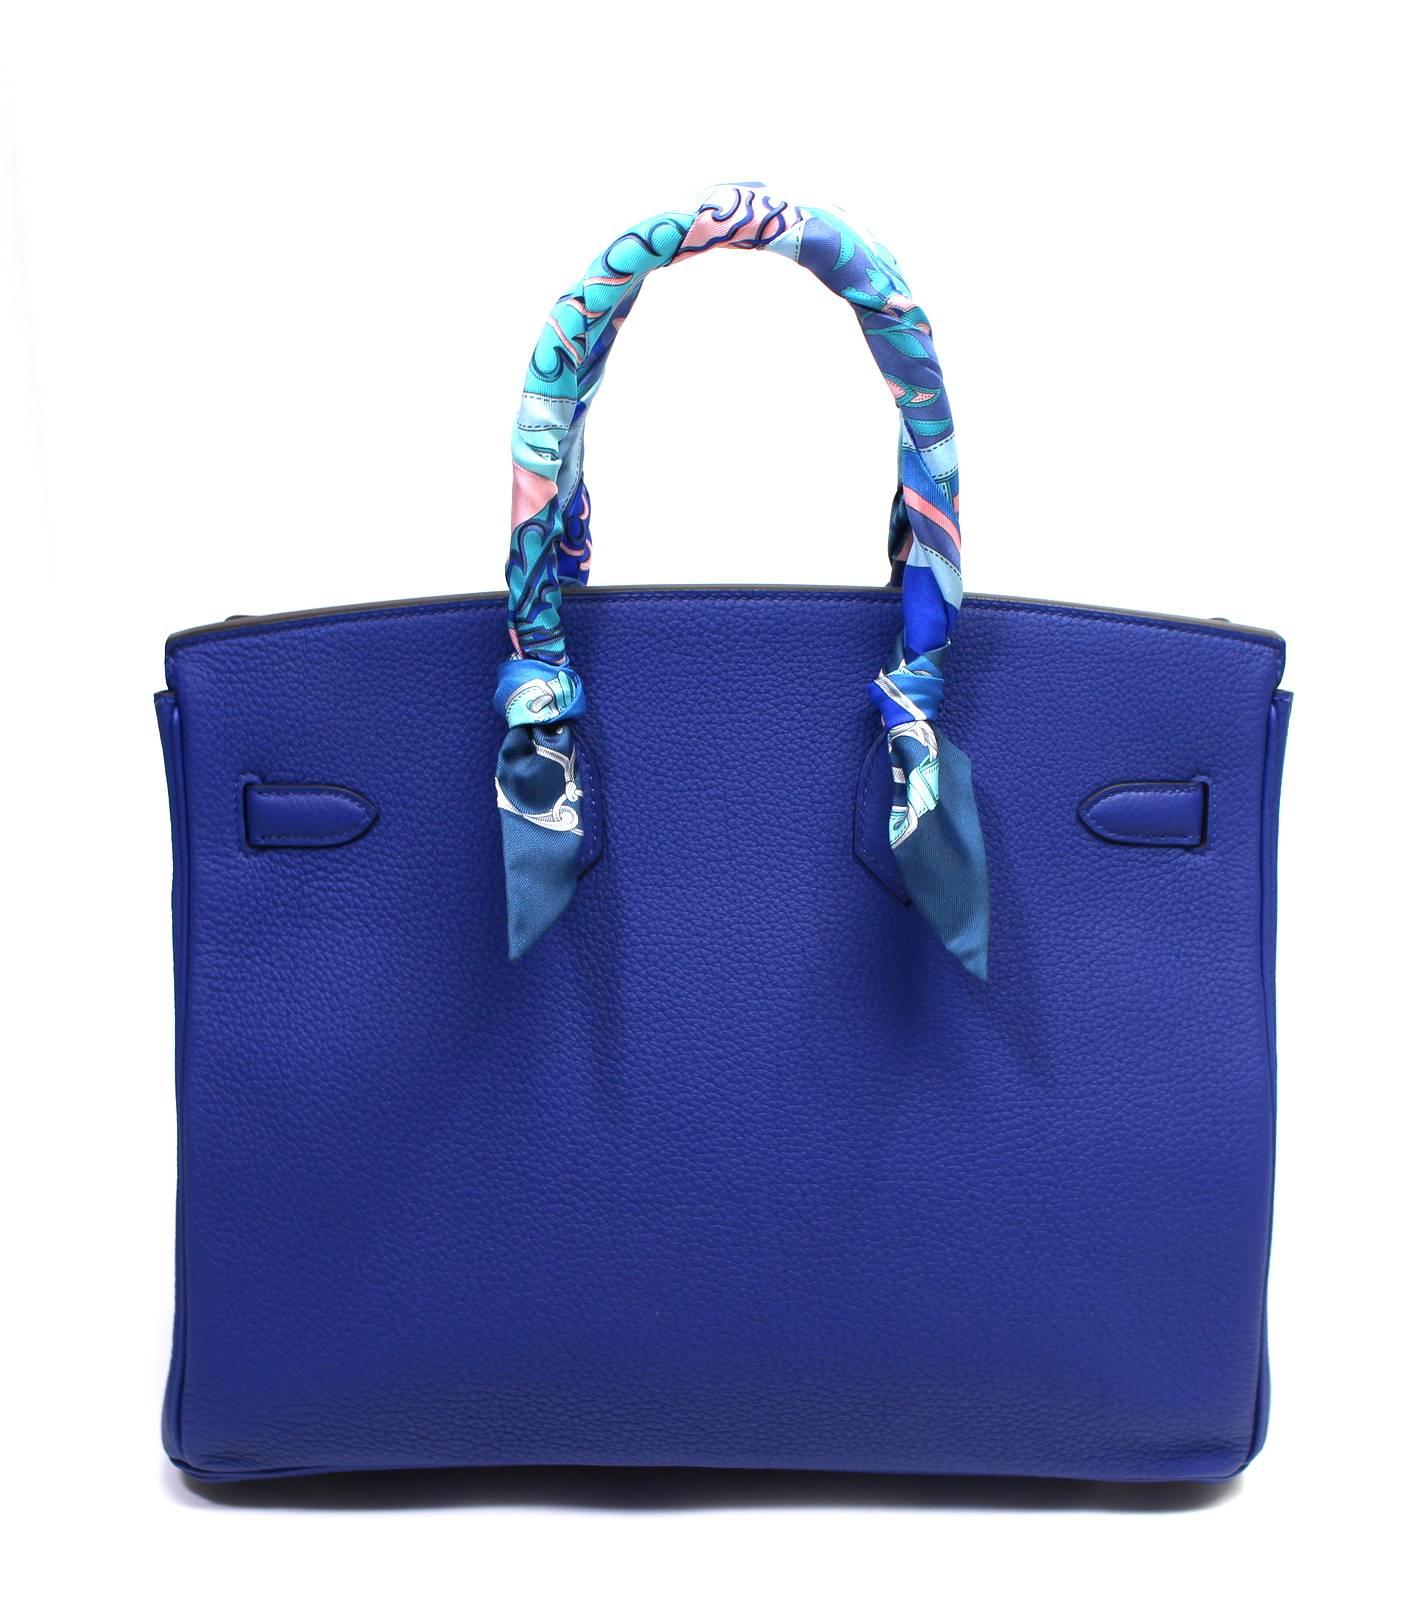 Hermès  Blue Electrique Togo Birkin Bag- 35cm with PHW In New Condition For Sale In New York City & Hamptons, NY